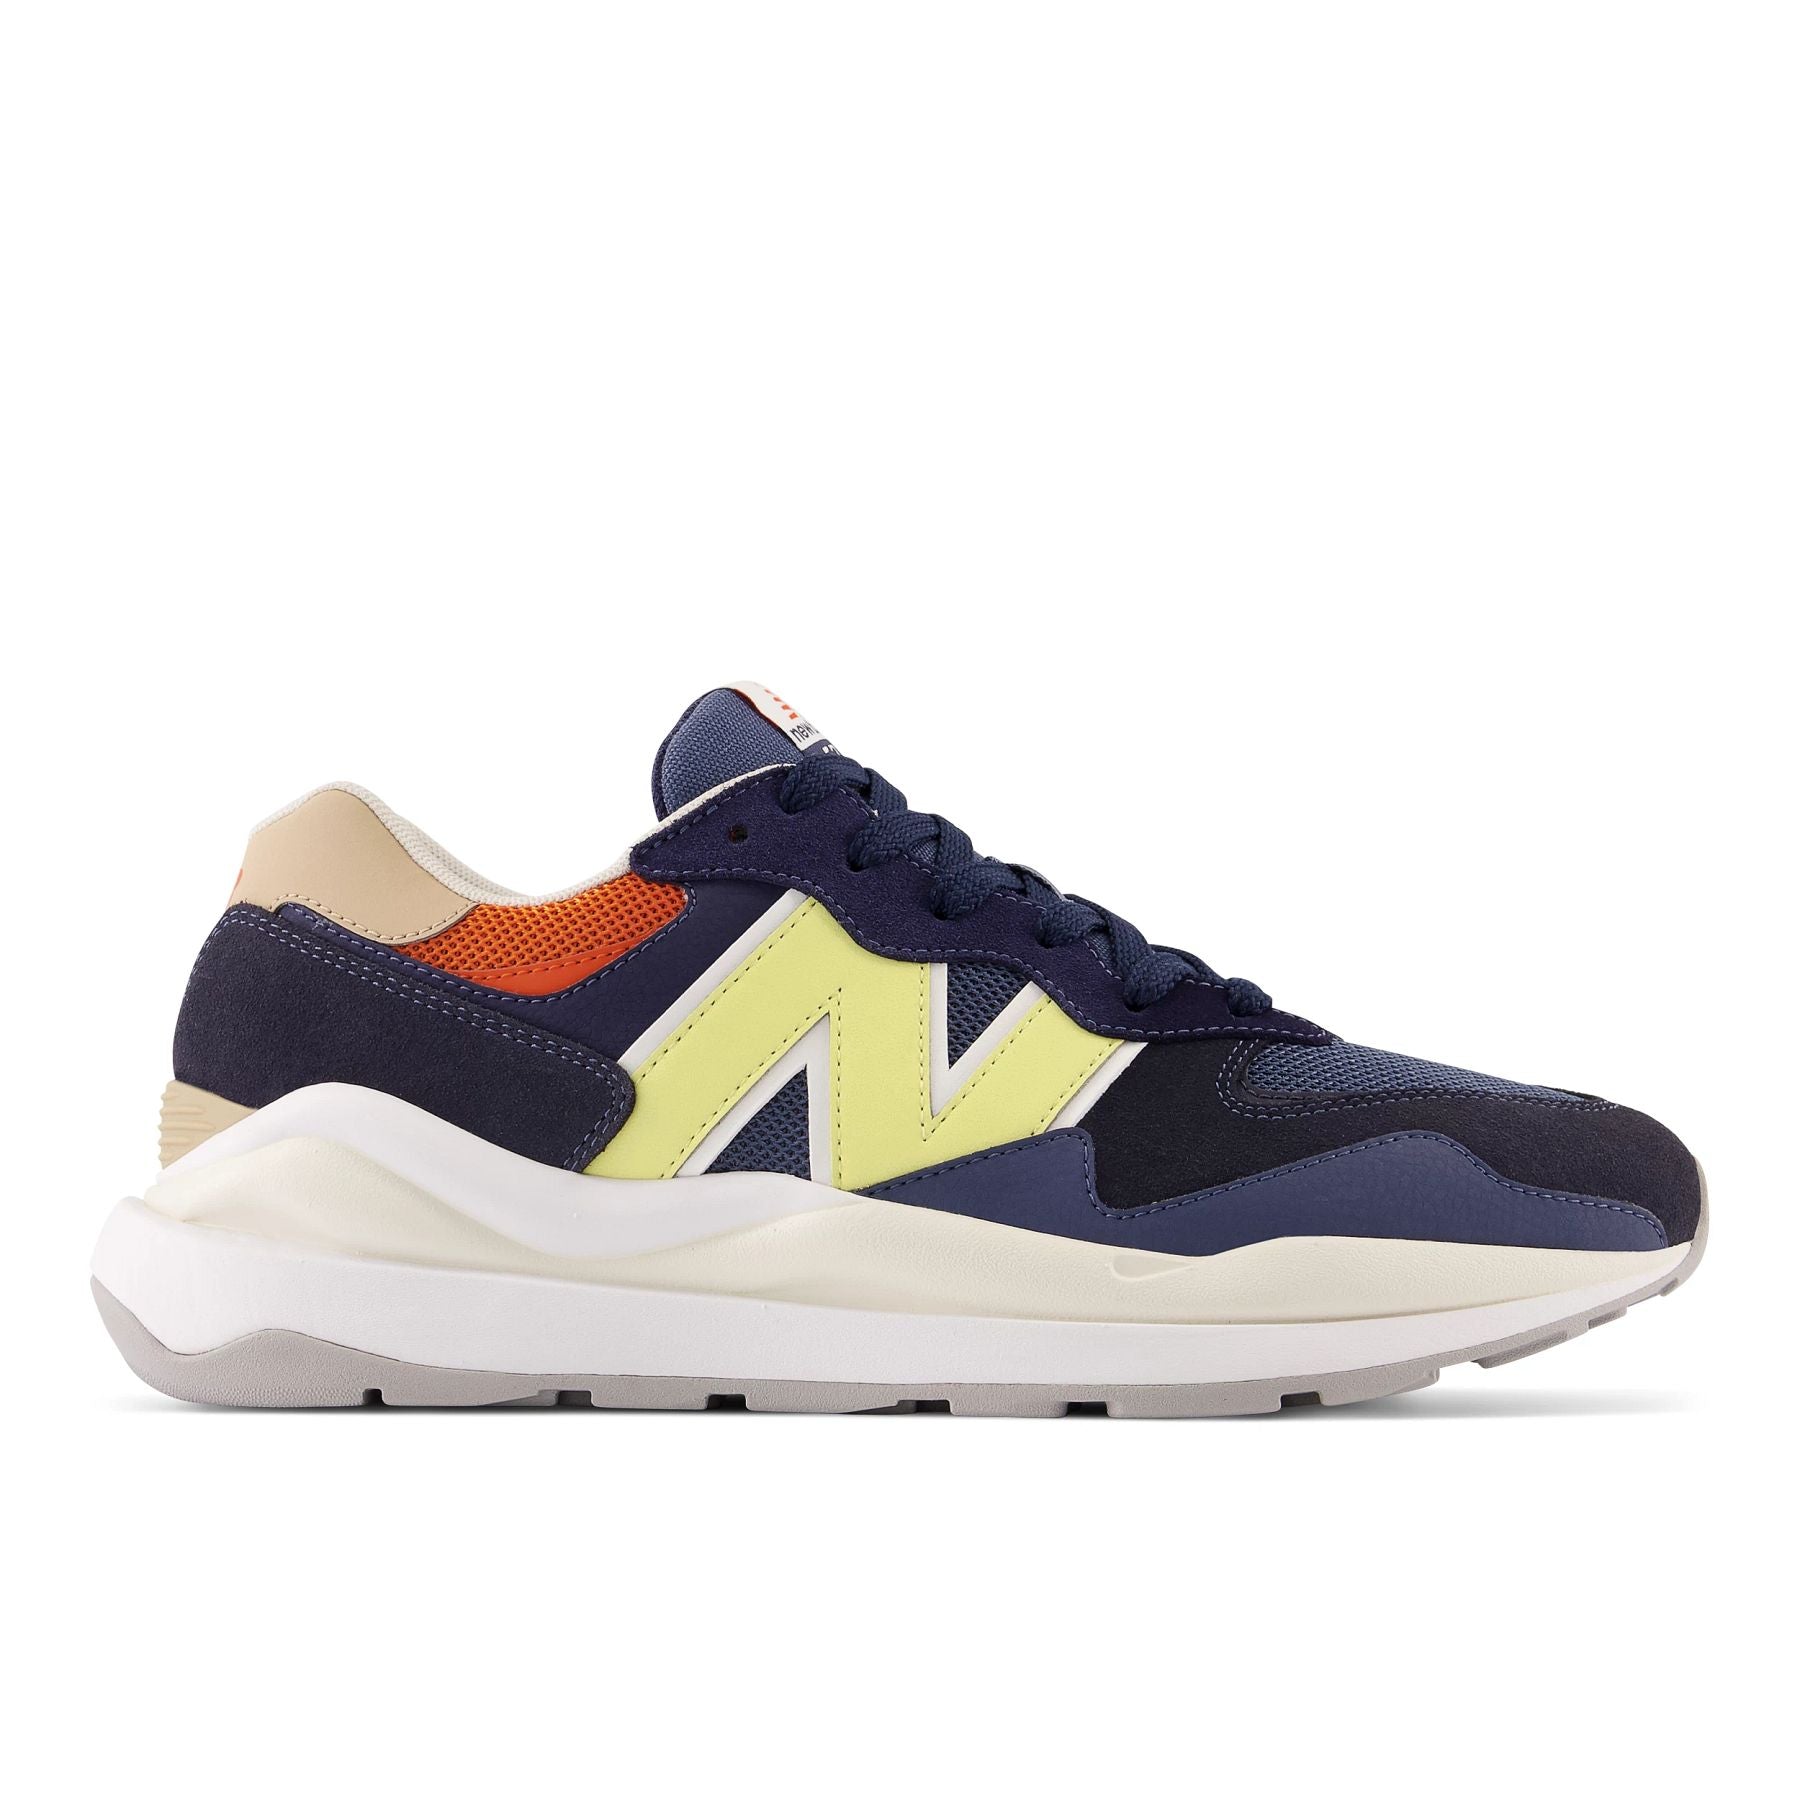 Lateral view of the Men's 5740 Lifestyle shoe by New Balance in the color Eclipse